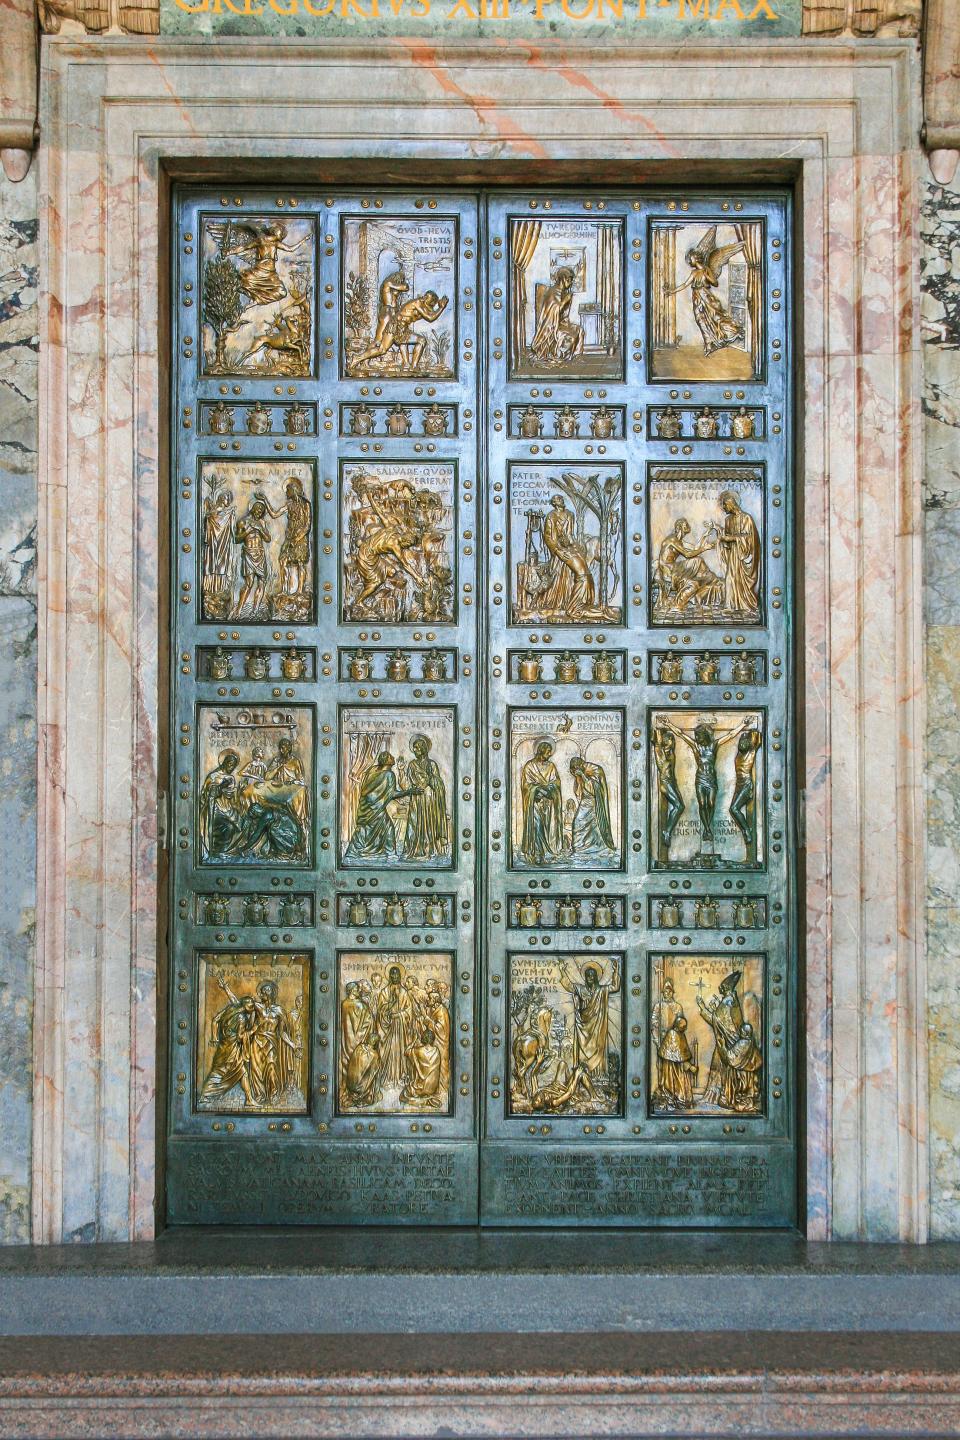 <h1 class="title">The Holy Door of St. Peter's Basilica, Vatican City, Rome, Italy.</h1><cite class="credit">Photo by Oleg Albinsky. Image courtesy of Getty.</cite>